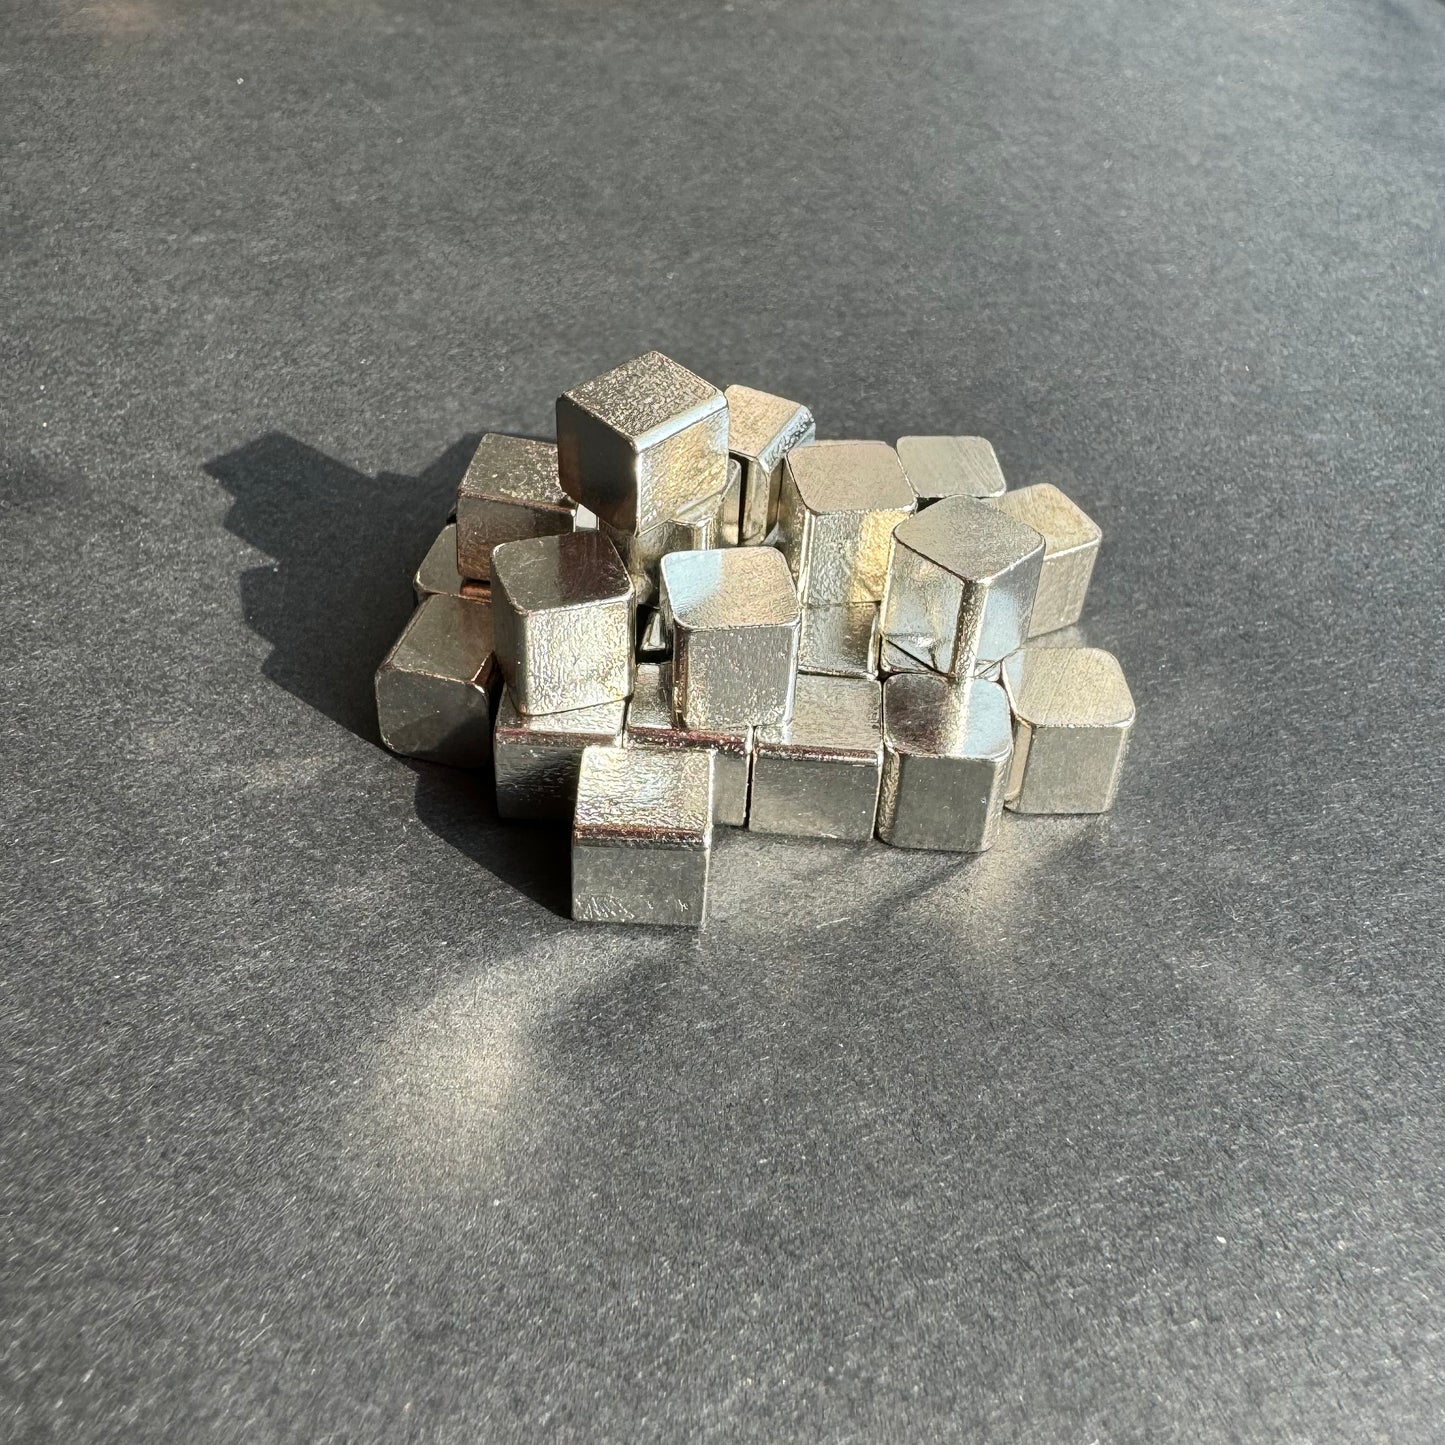 40x 8mm/0.31inches Metal Cubes in Bronze, Sliver and Gold, Upgraded Board Game Tokens, Iron Miniature